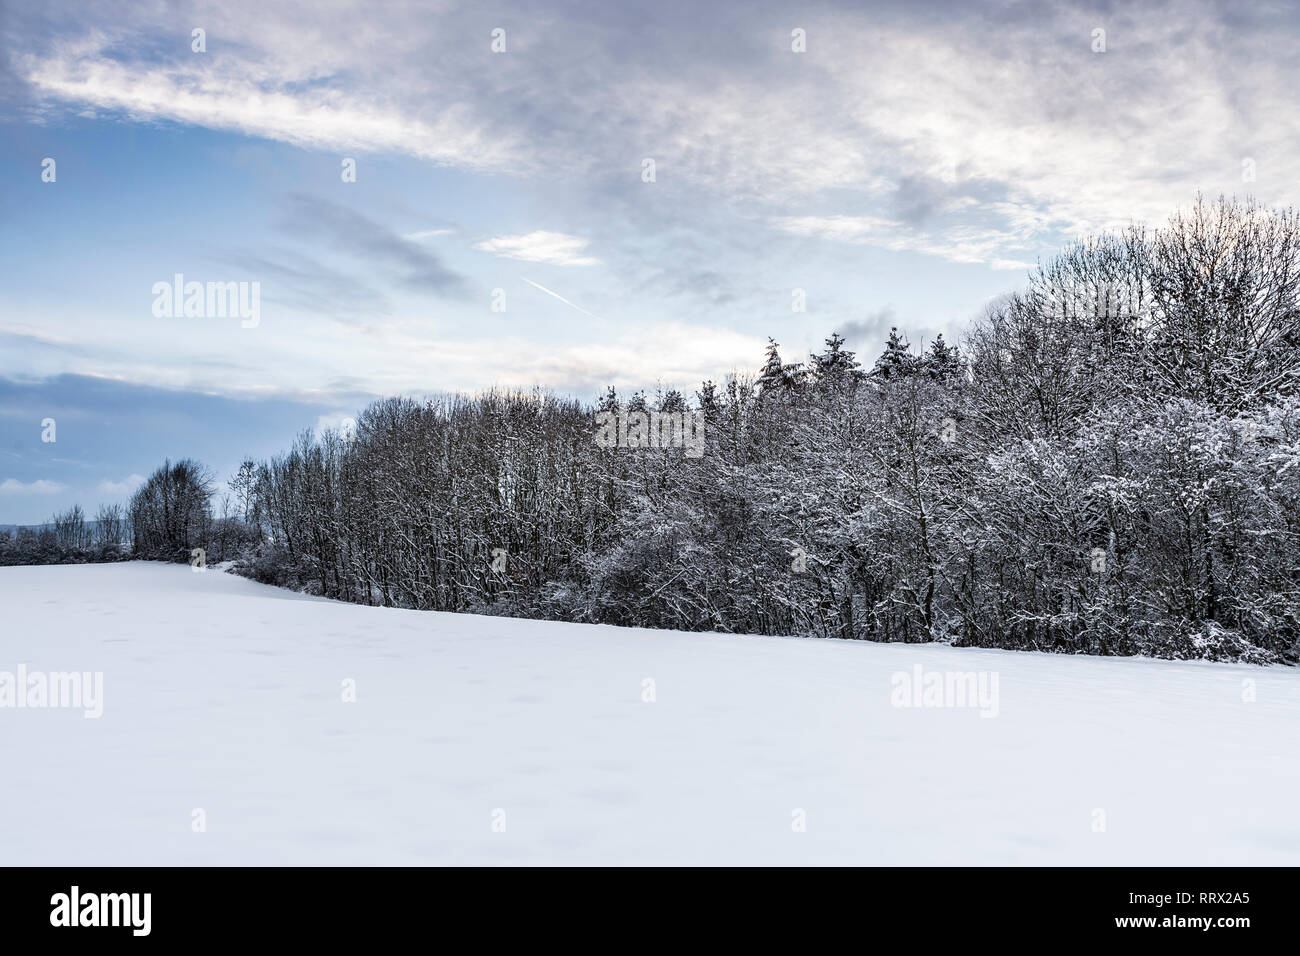 Snowy winter landscape with beautiful sunset sky Stock Photo